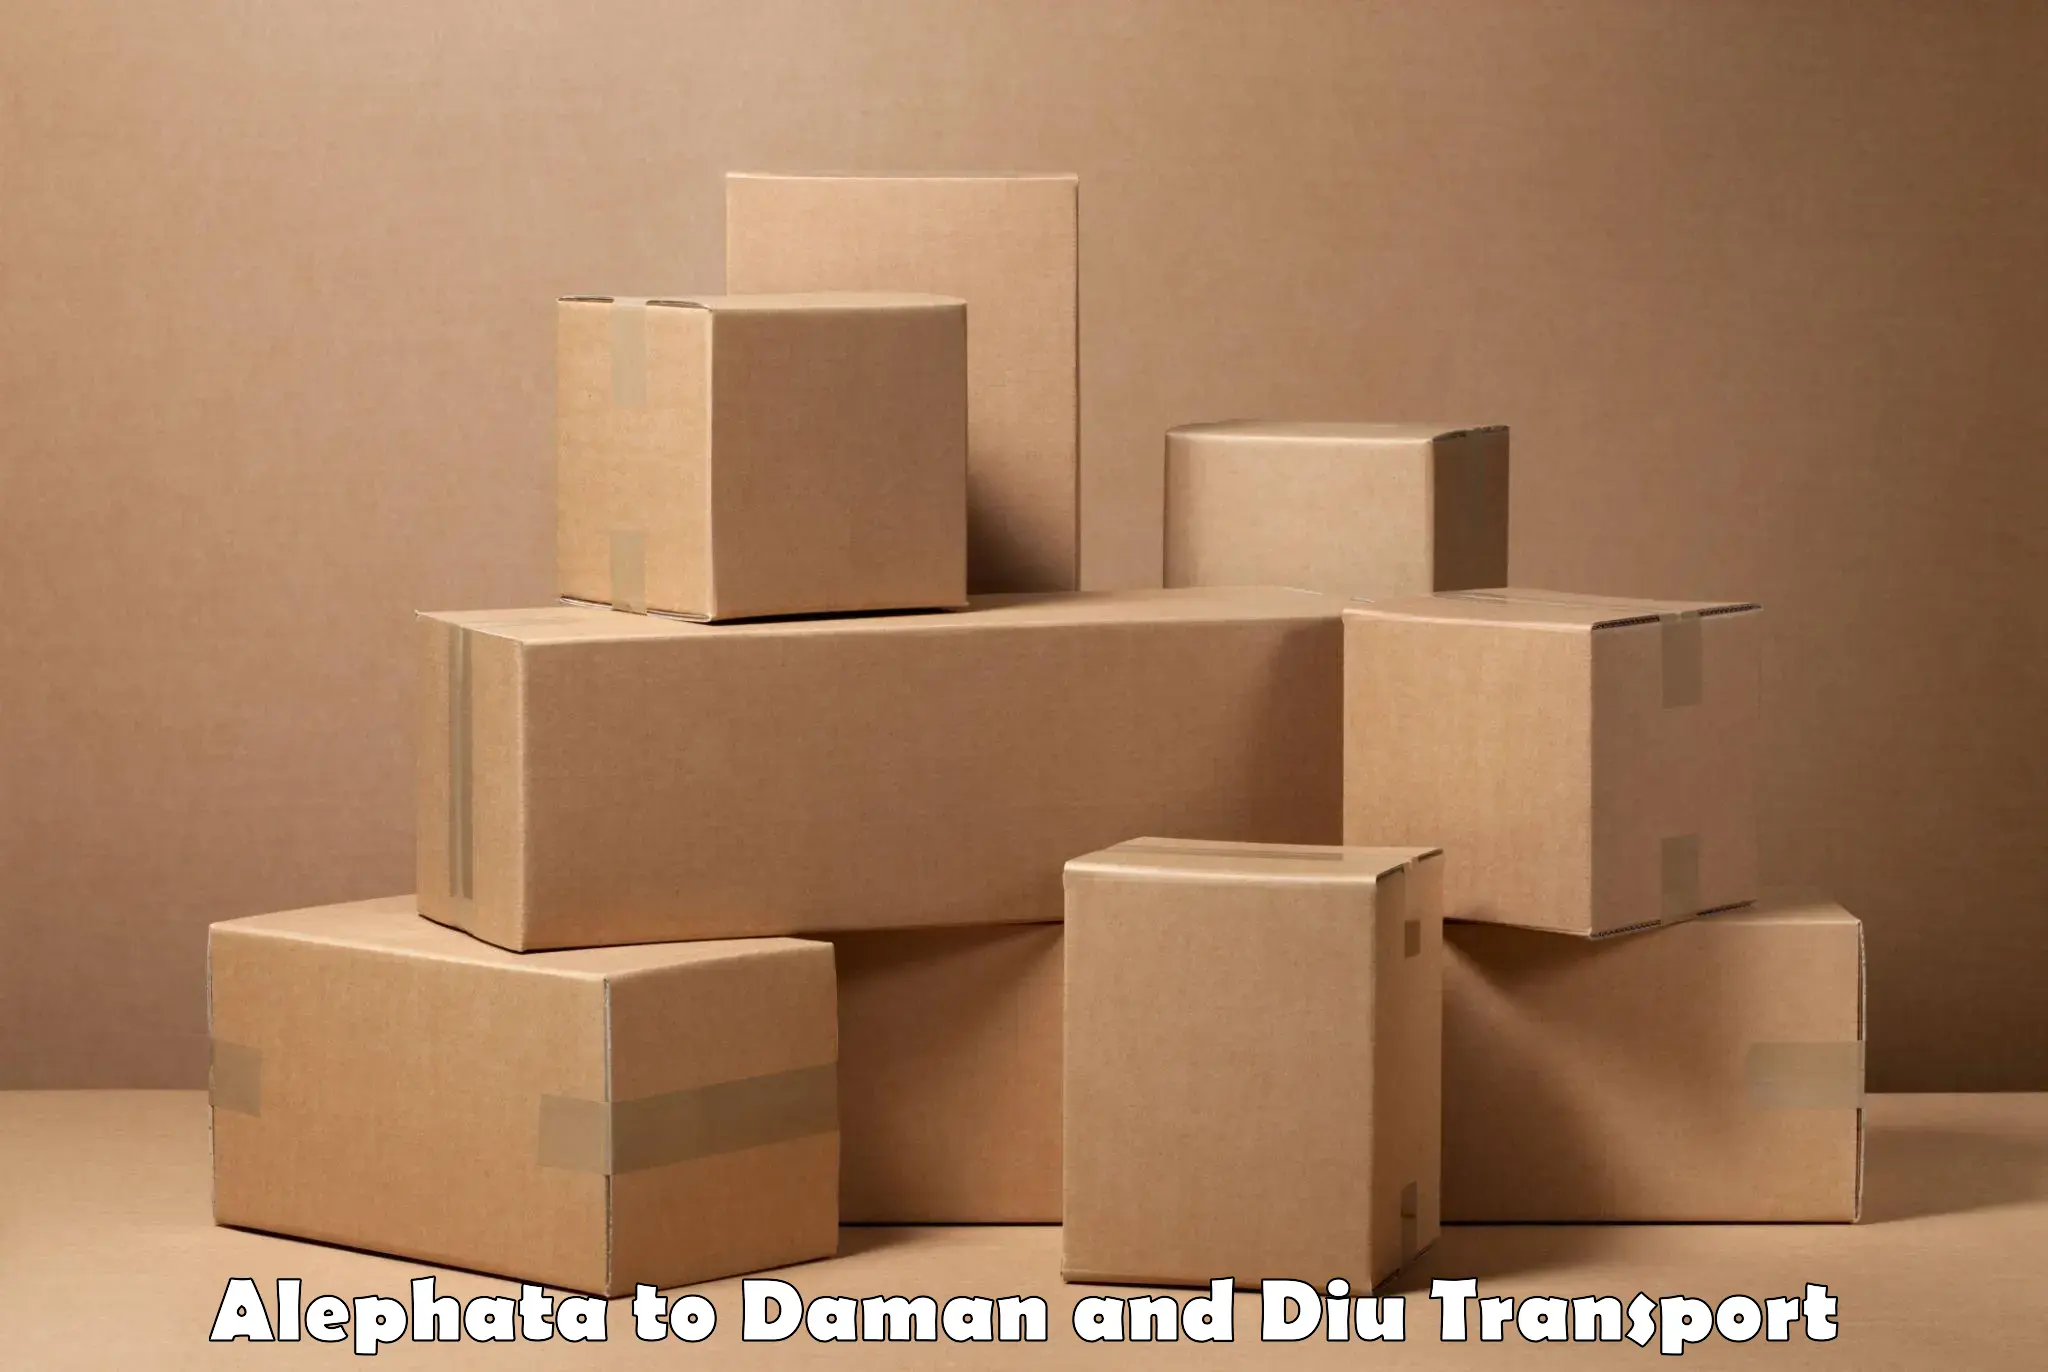 All India transport service Alephata to Daman and Diu